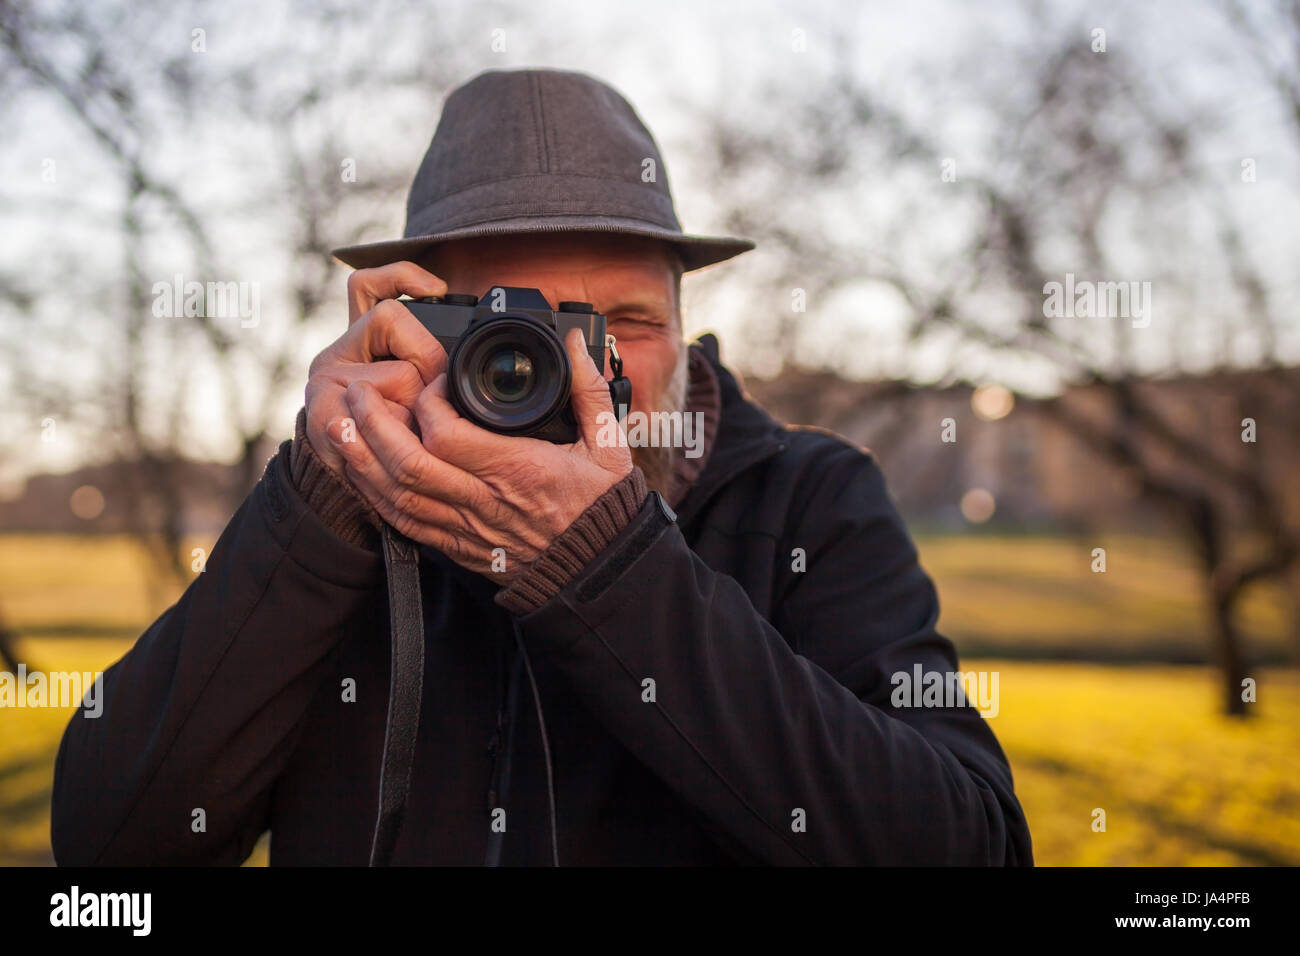 A mature man in a hat takes pictures on a mirrorless camera in the street. Hobby of photography. New trends in photographic technique. Stock Photo